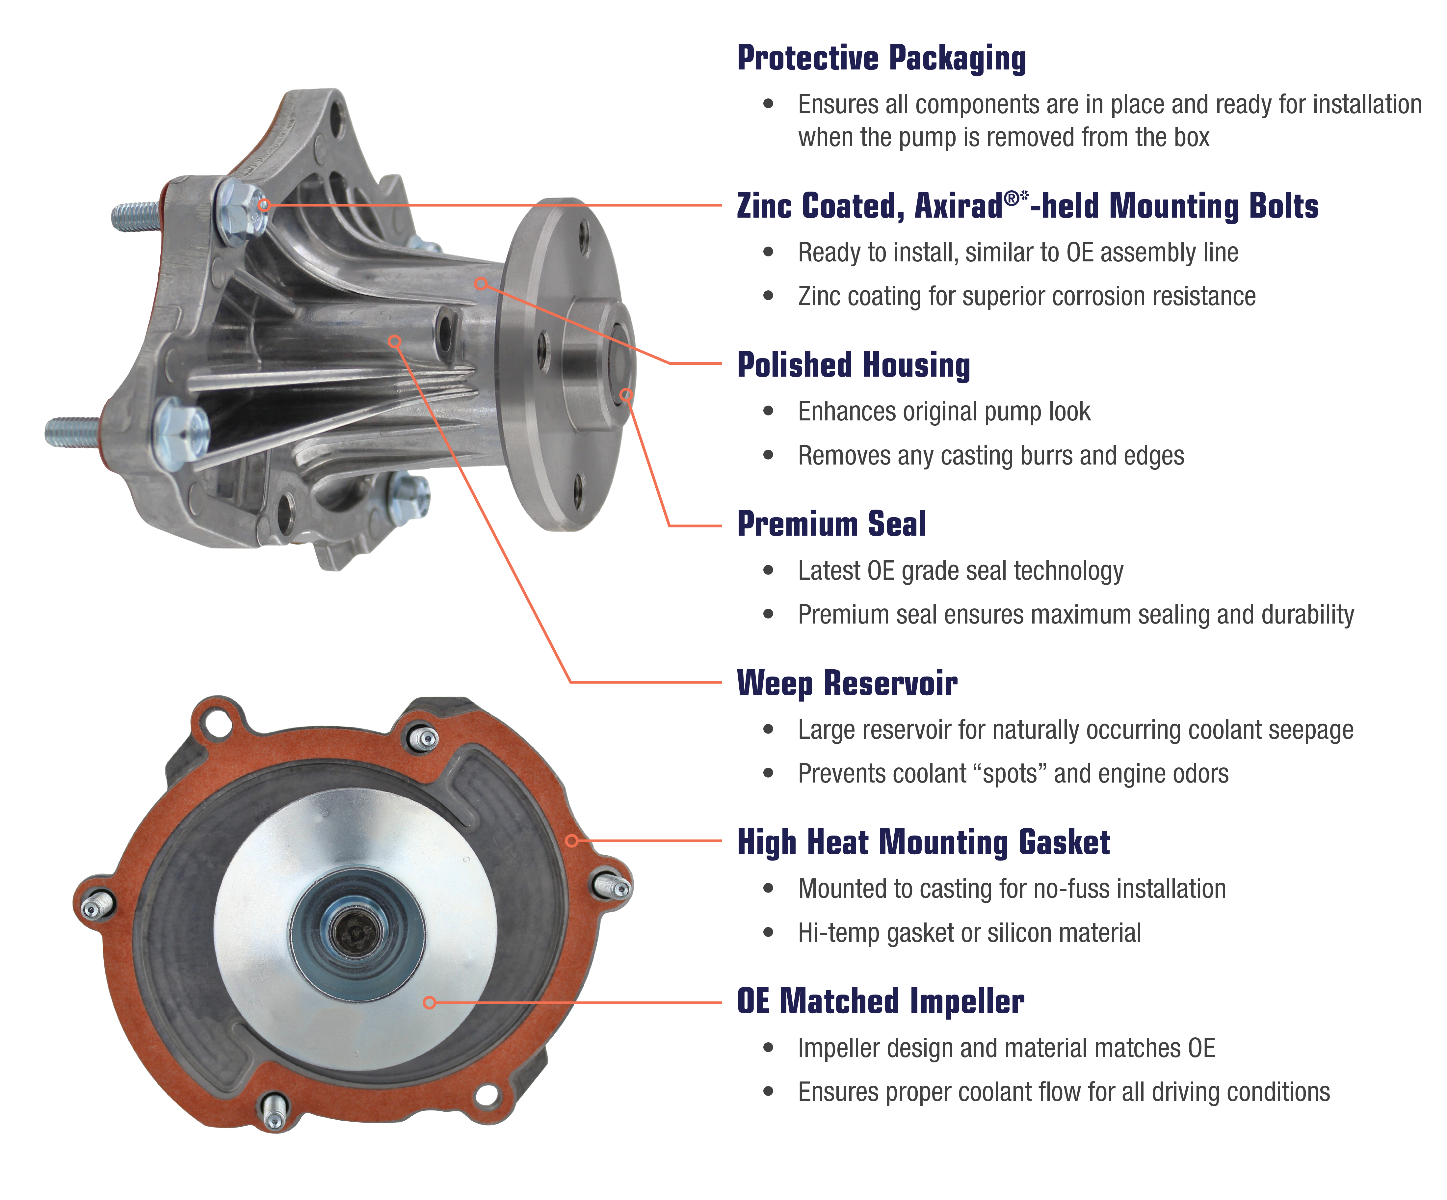 Parts of Water Pump - Industrial Manufacturing Blog